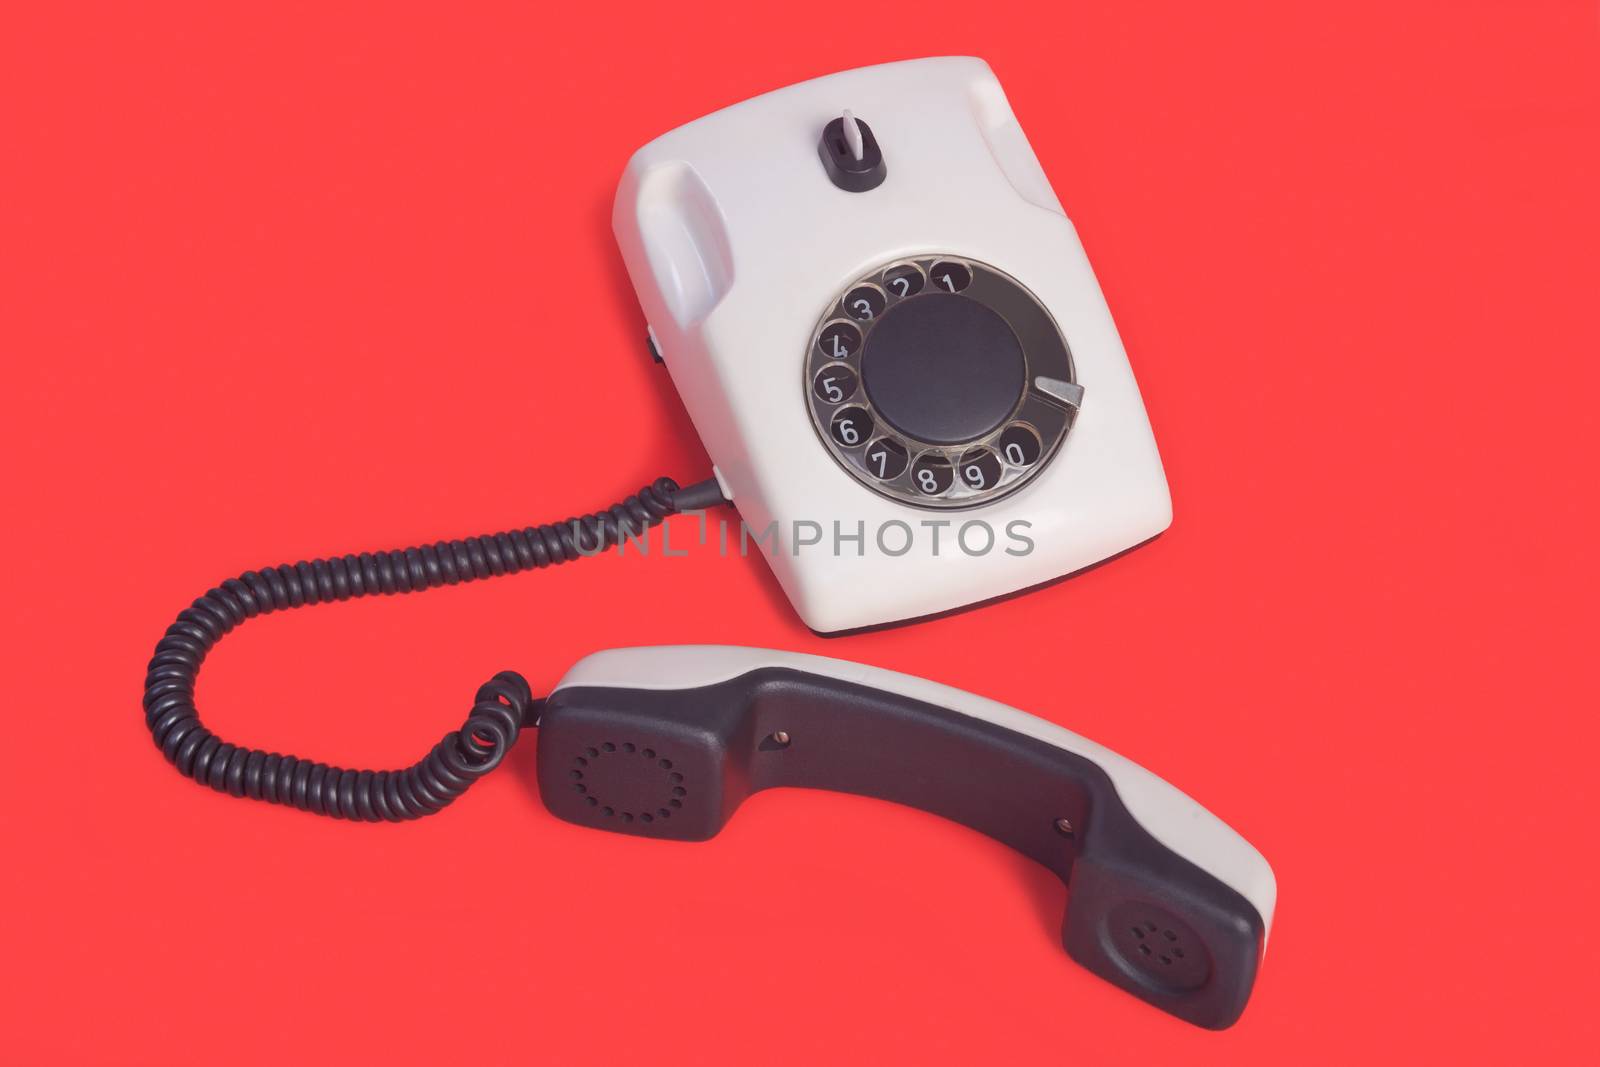 White rotational phone on red background